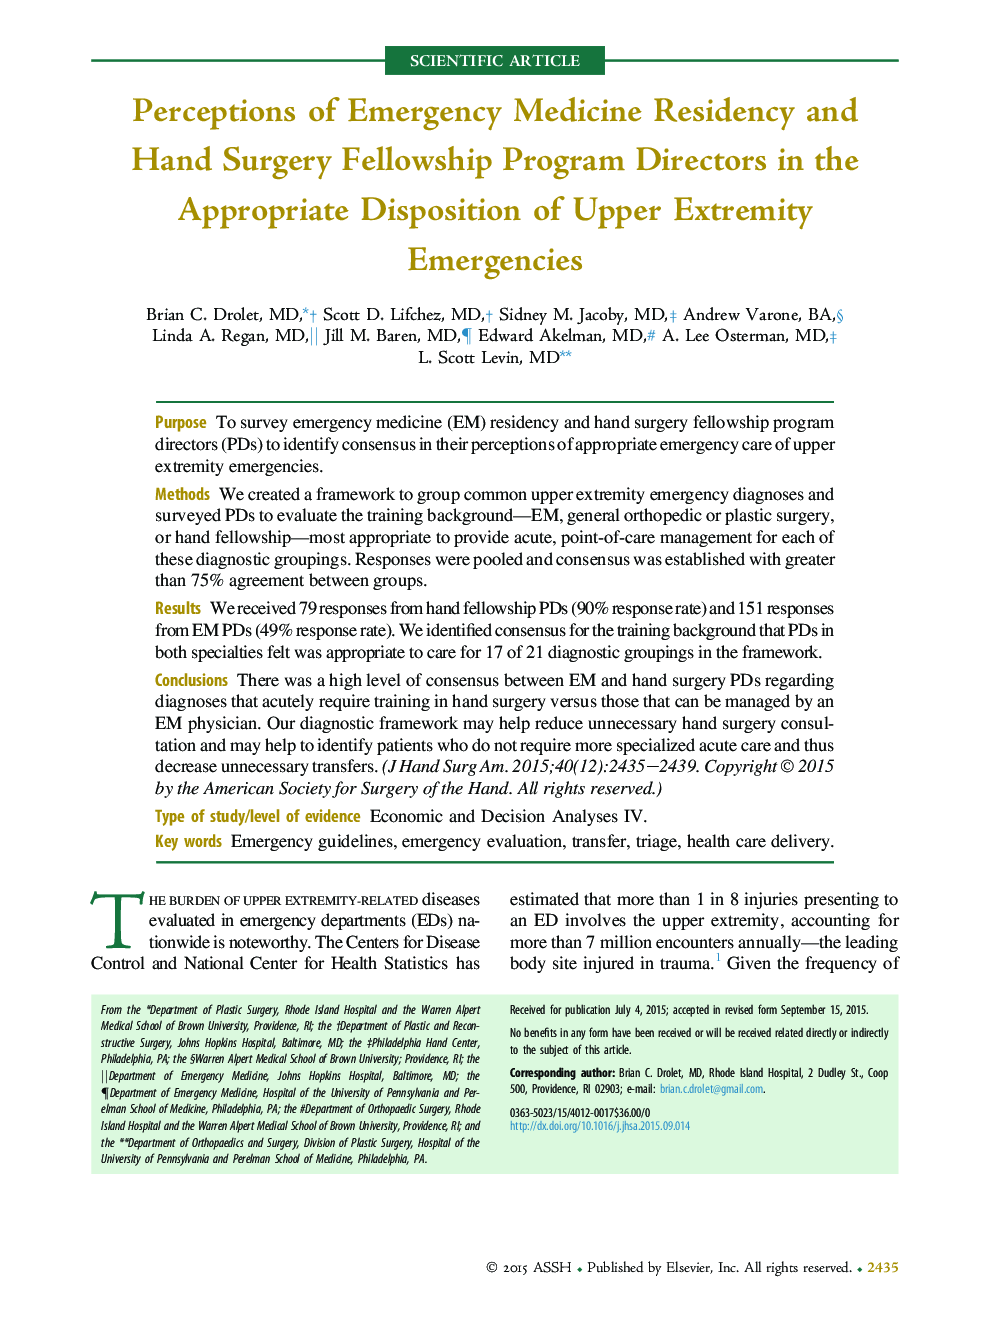 Perceptions of Emergency Medicine Residency and Hand Surgery Fellowship Program Directors in the Appropriate Disposition of Upper Extremity Emergencies 